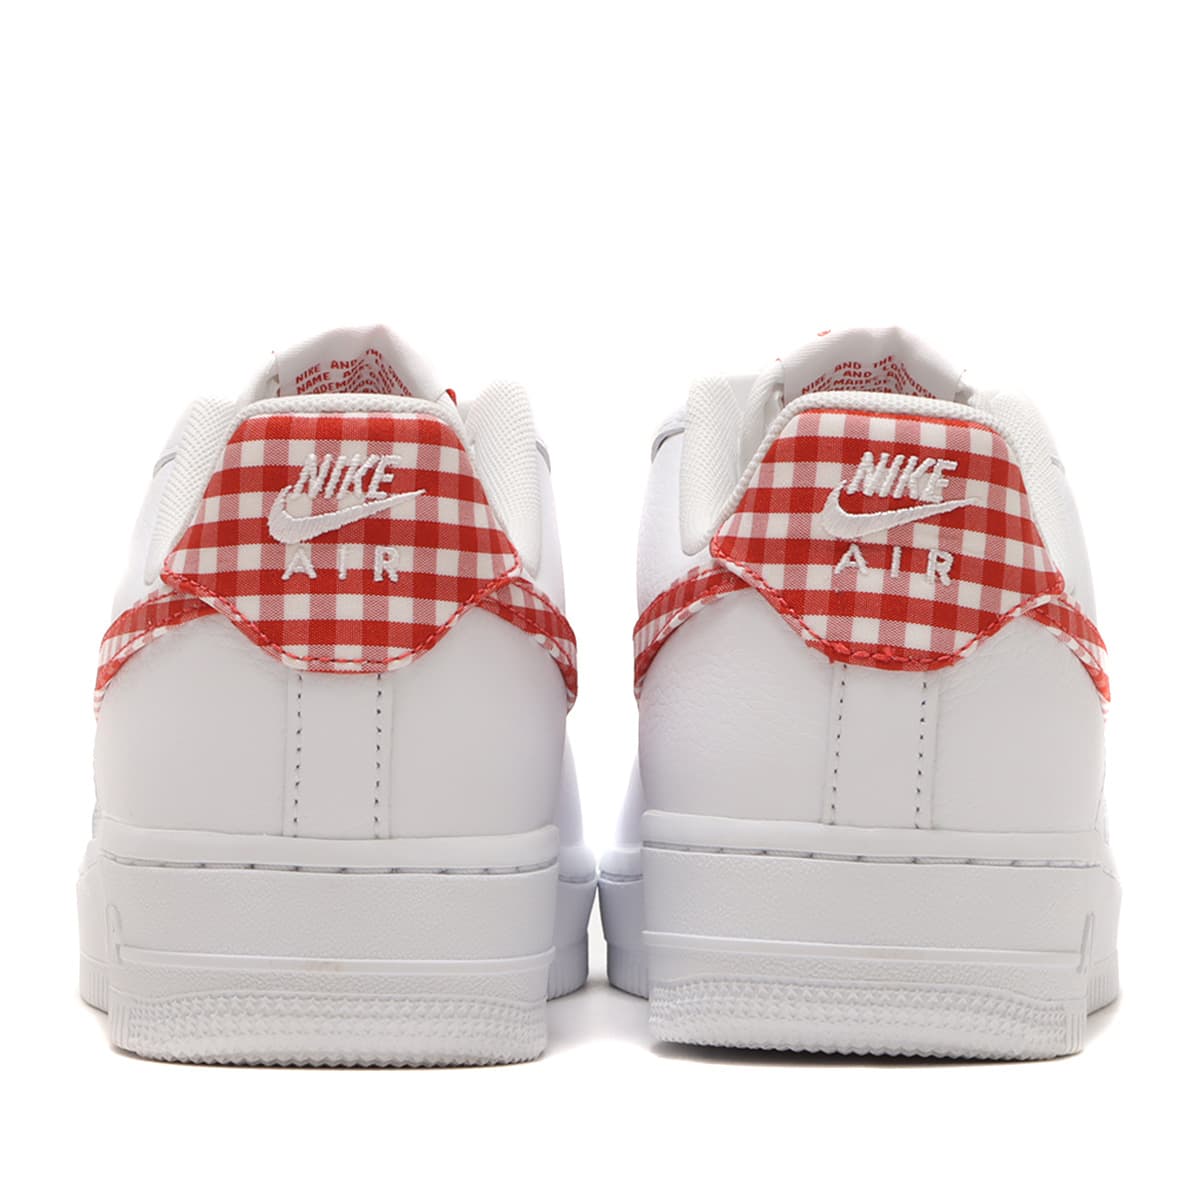 NIKE WMNS AIR FORCE 1 '07 ESS TREND WHITE/MYSTIC RED 23FA-I